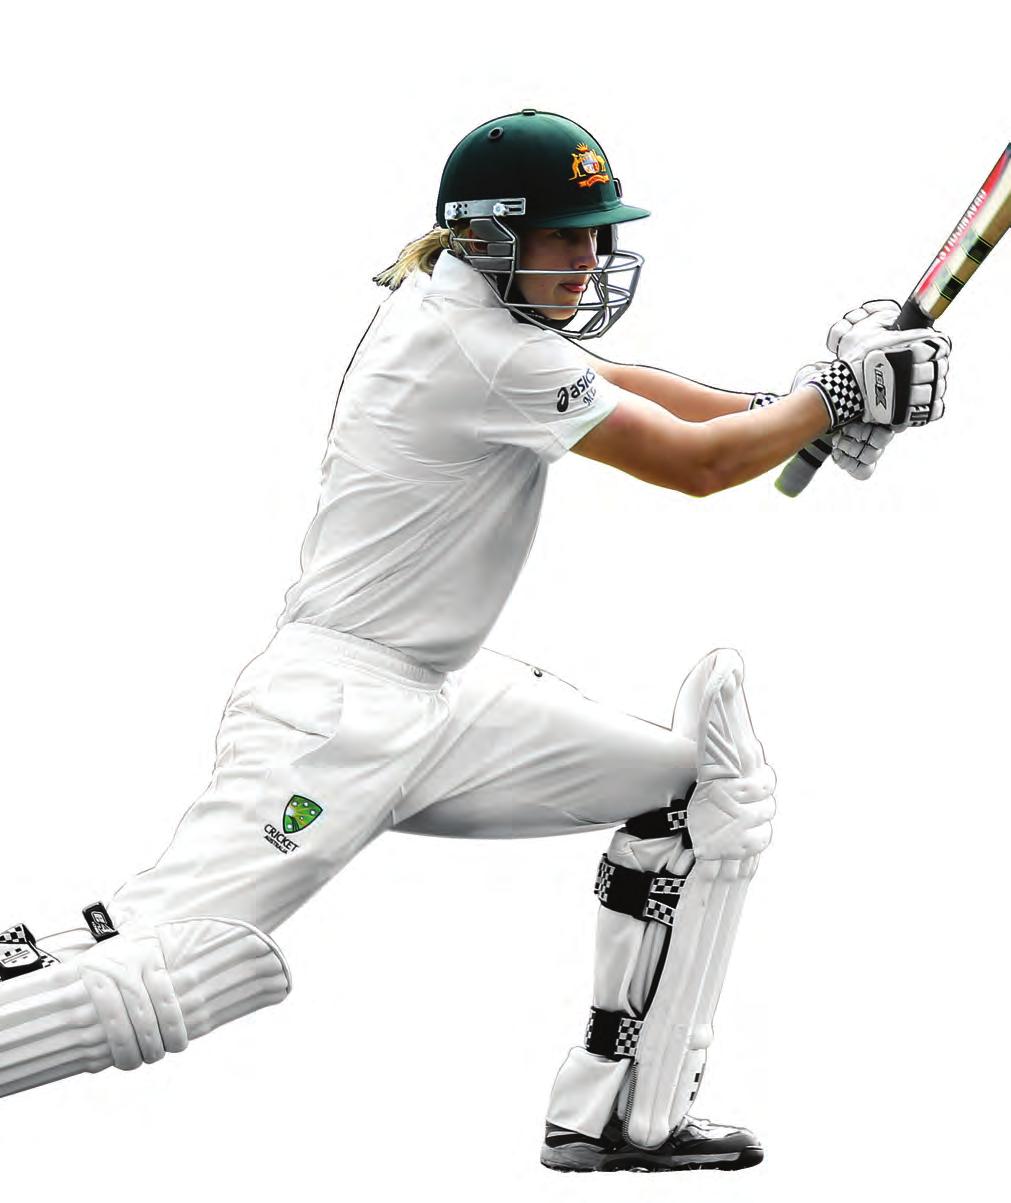 We want all cricketers to have every chance to maximise their